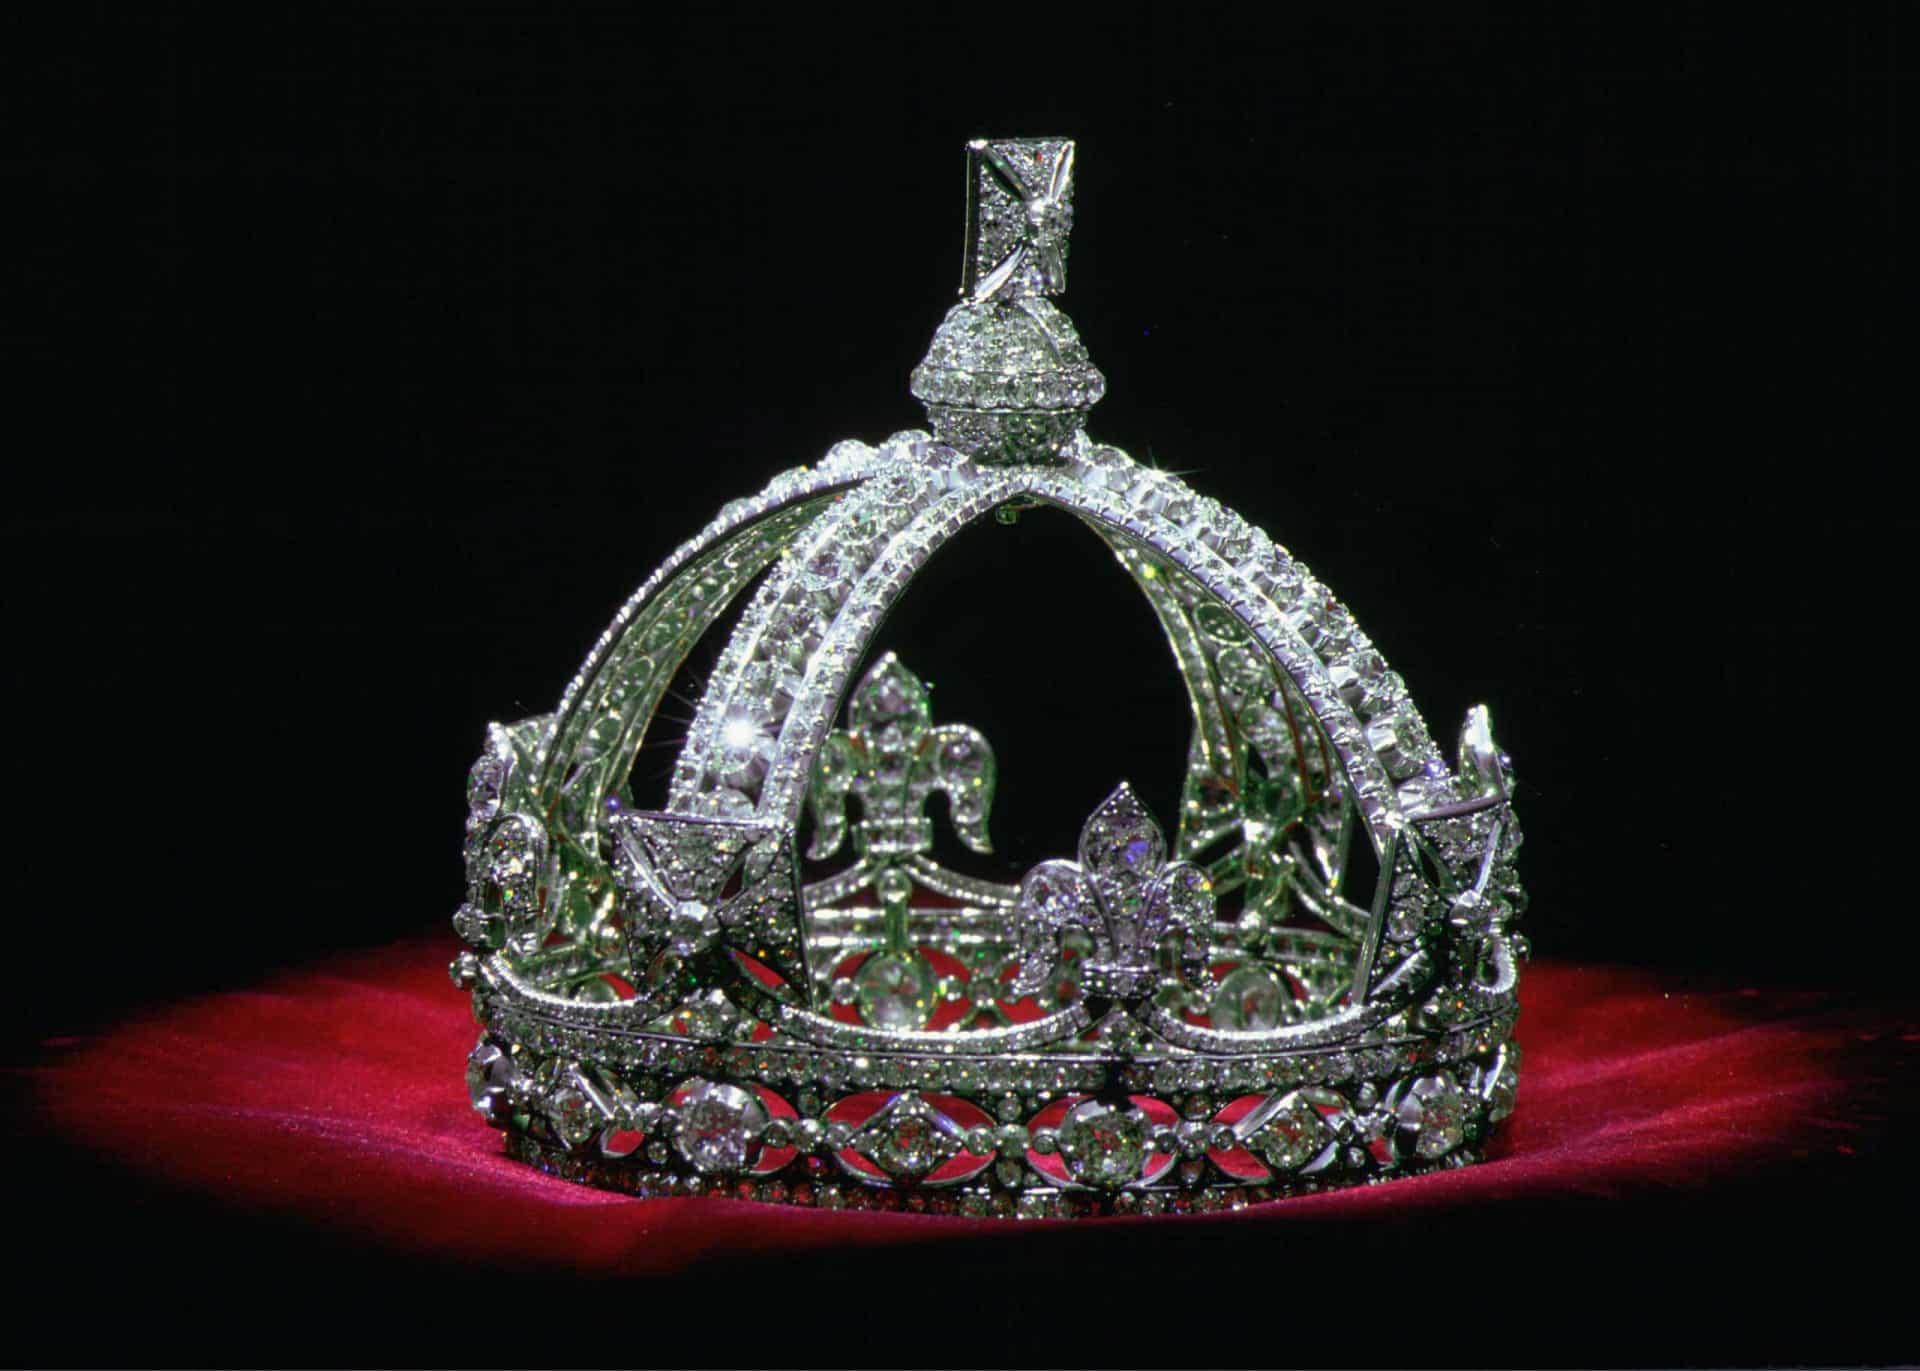 <p>Queen Victoria's small diamond crown, pictured on display in the Jewel House at the Tower Of London. It's a miniature imperial and state crown made at the monarch's request in 1870 to wear over her widow's cap following the death of her husband, Prince Albert.</p>